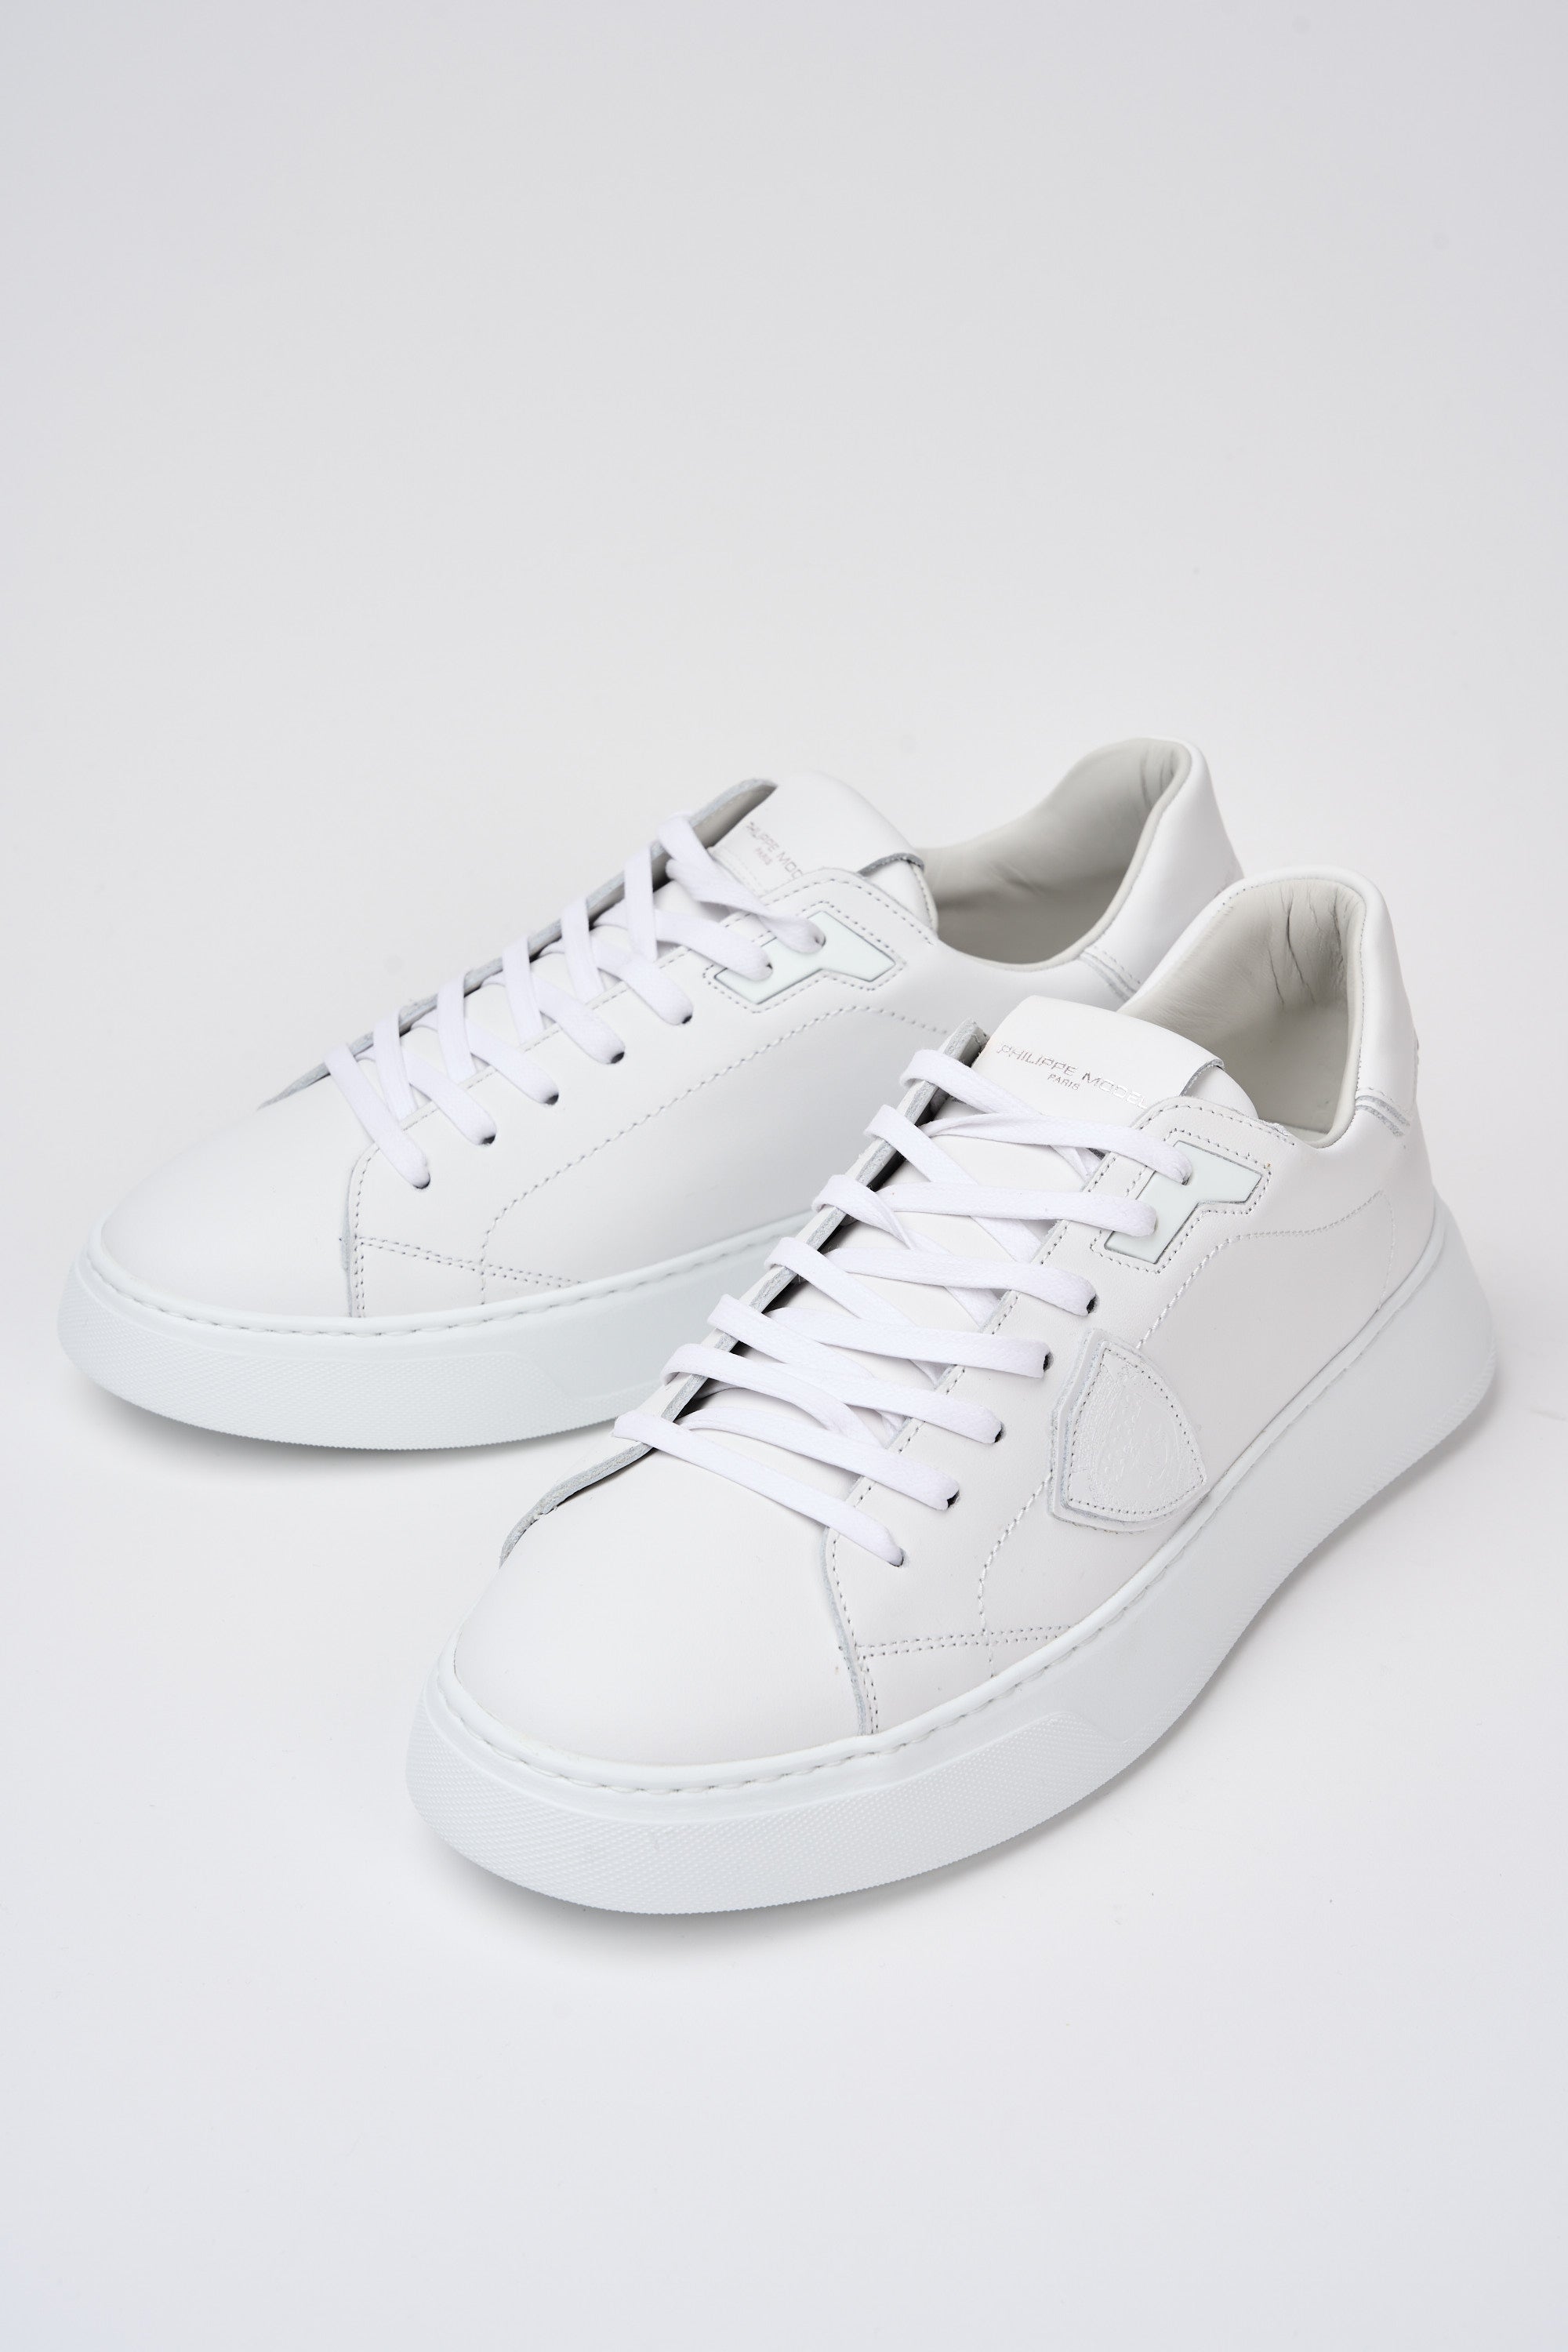 Philippe Model Sneakers Temple Leather White-6